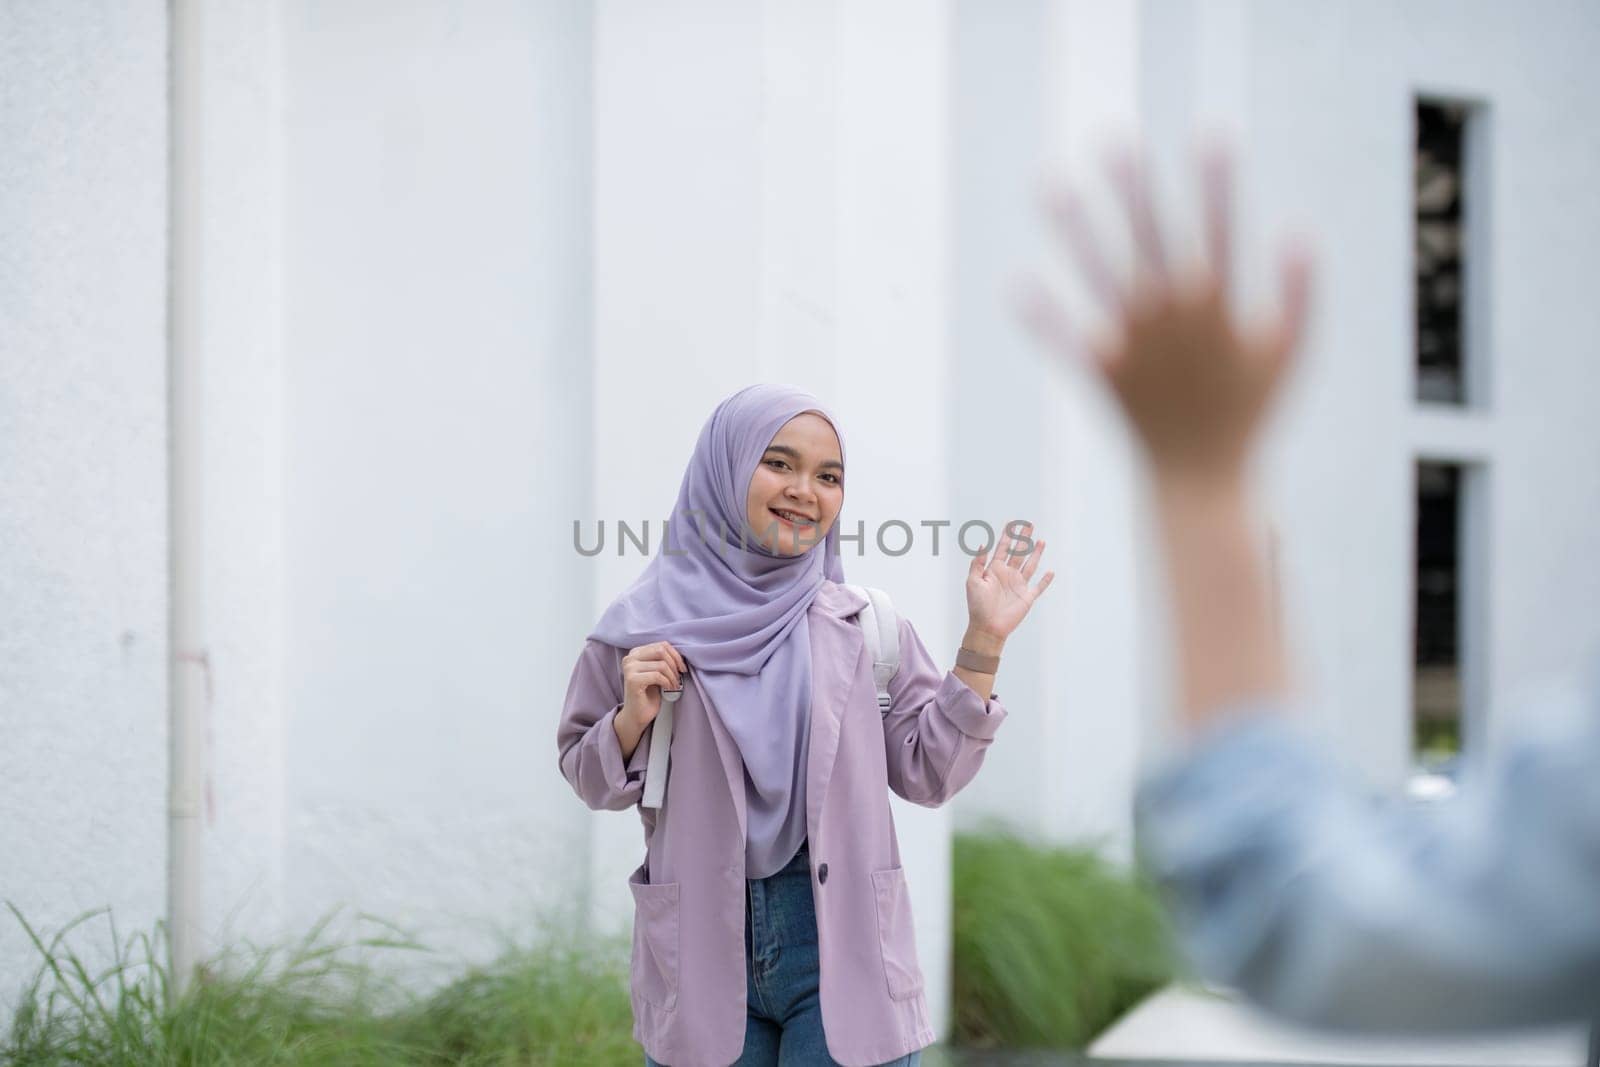 Beautiful Muslim college student girl waving to greet a friend at university by nateemee